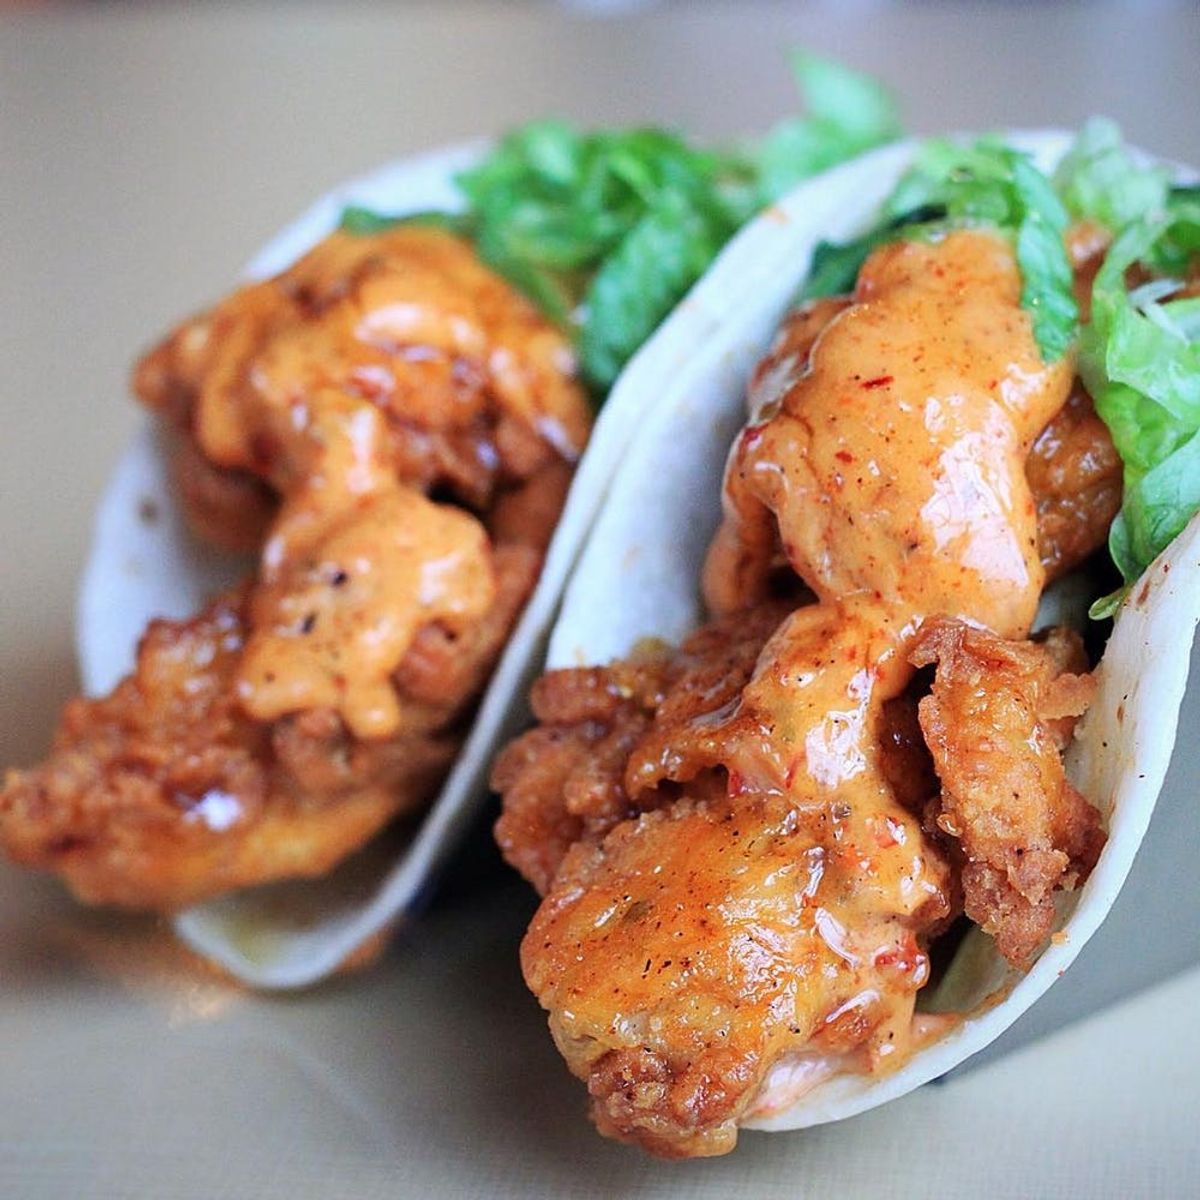 15 Fried Chicken Dishes That Will Impress the Cluck Out of You